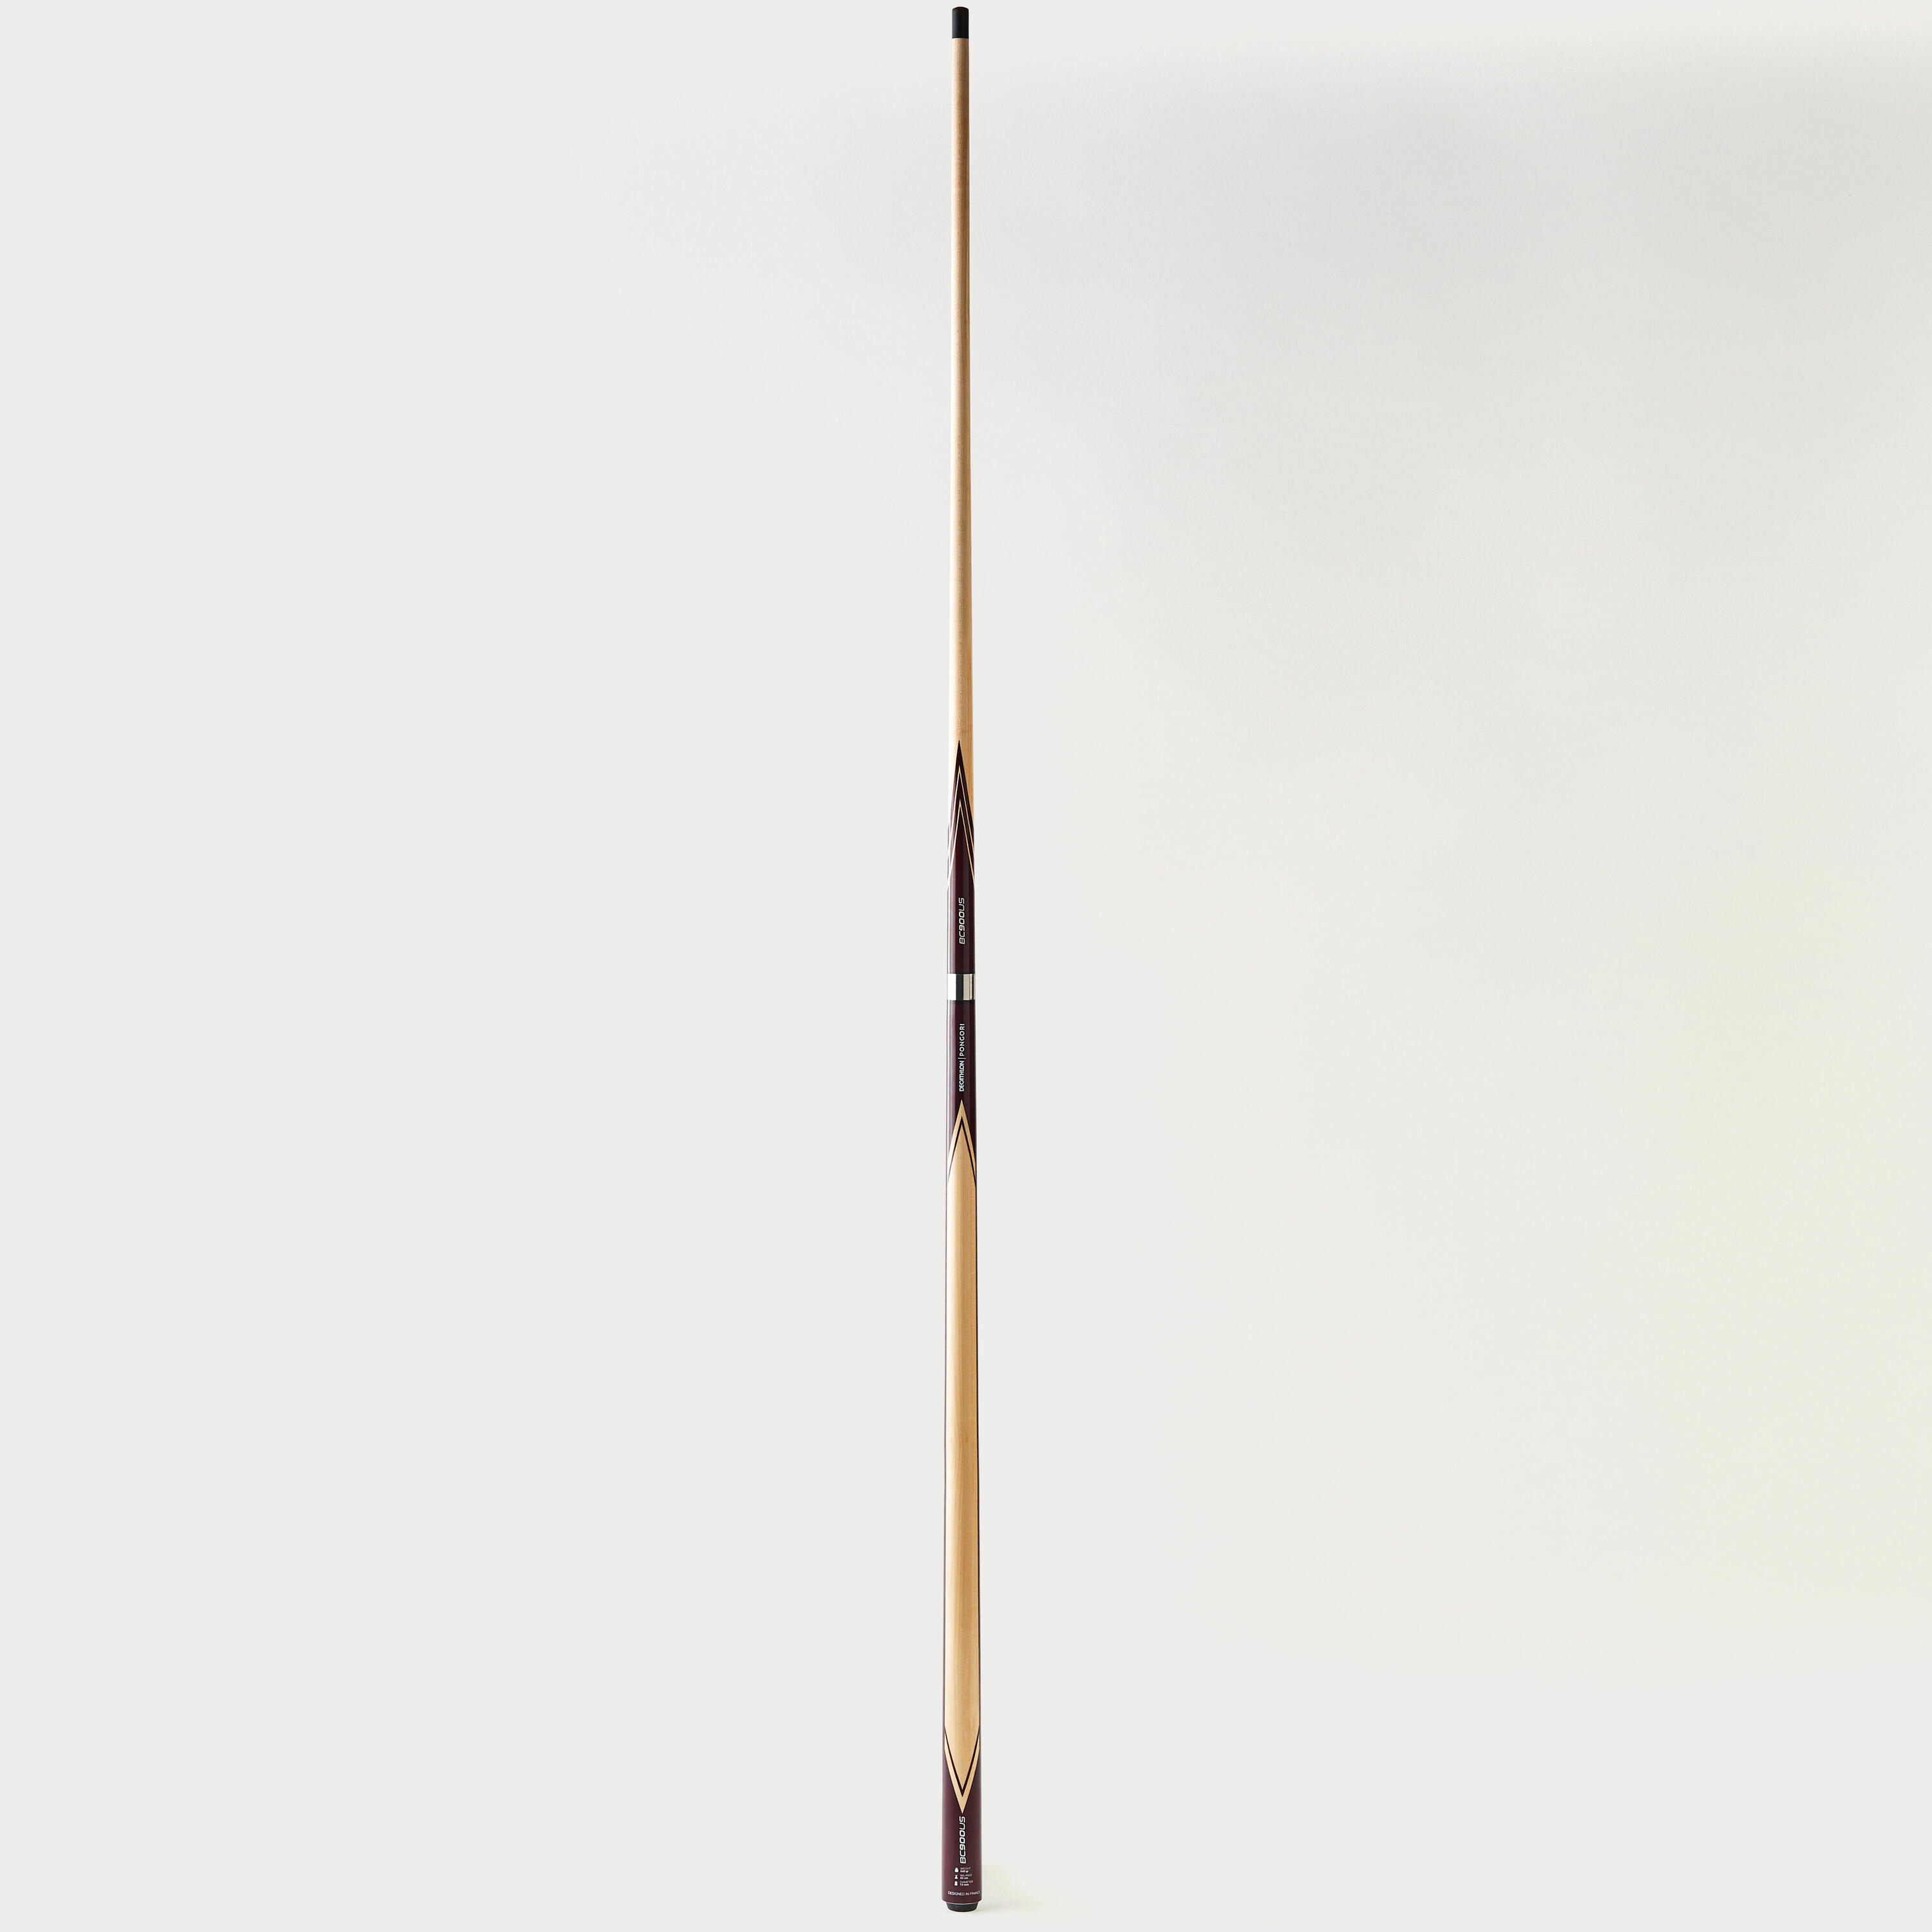 Two-Piece Half-Jointed Pool Cue 13 mm BC 900 US 2/11